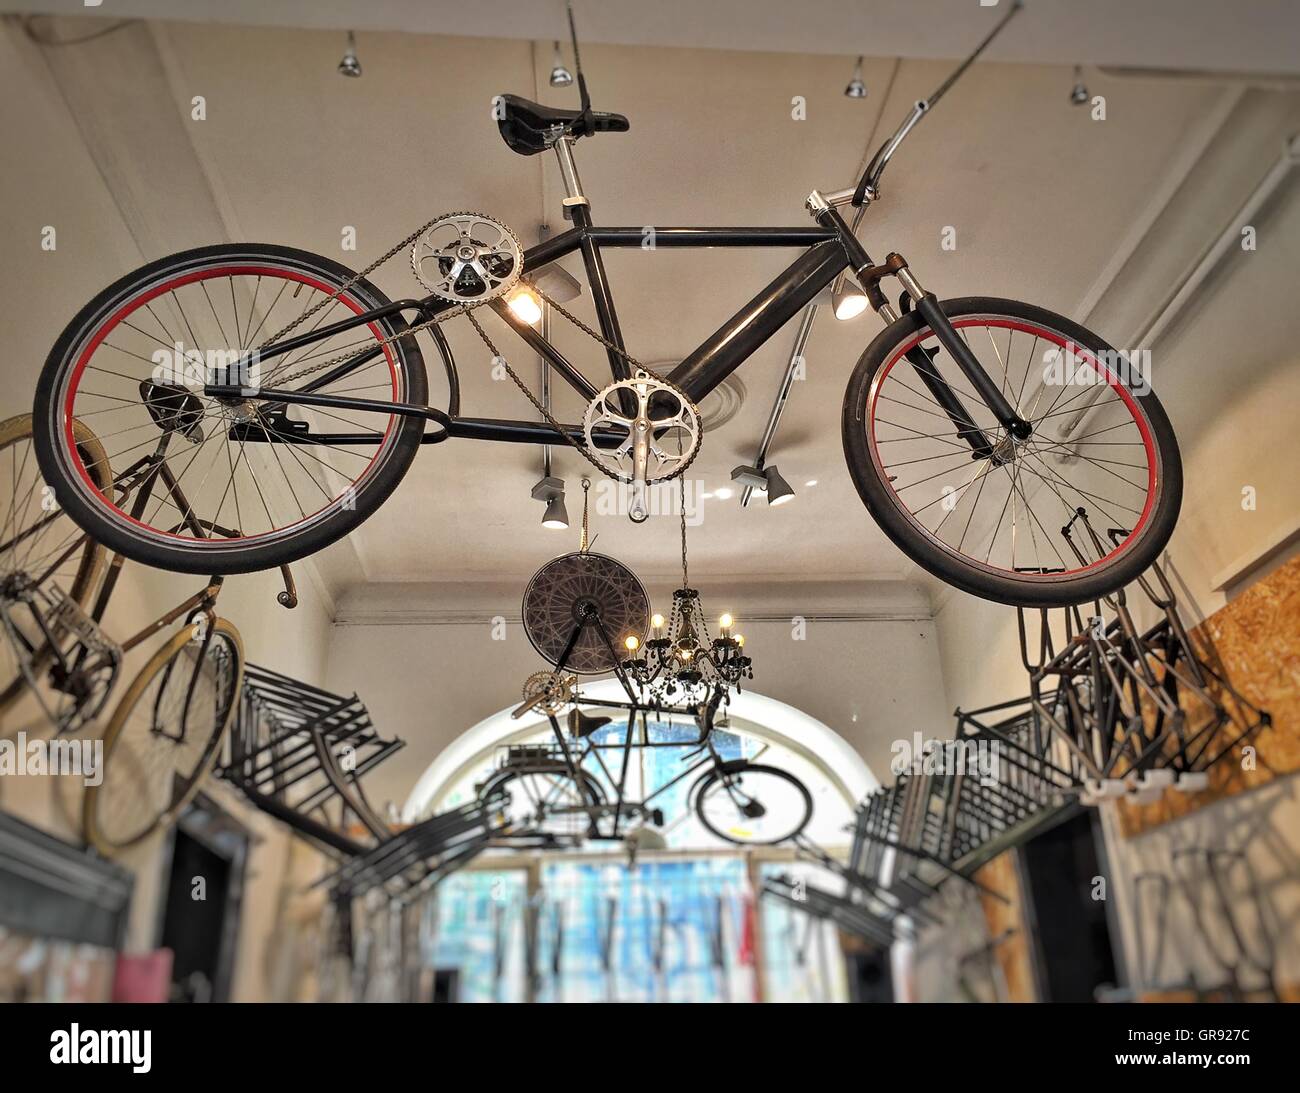 Low Angle View Of Bicycle Hanging From Ceiling In Saga Cykler